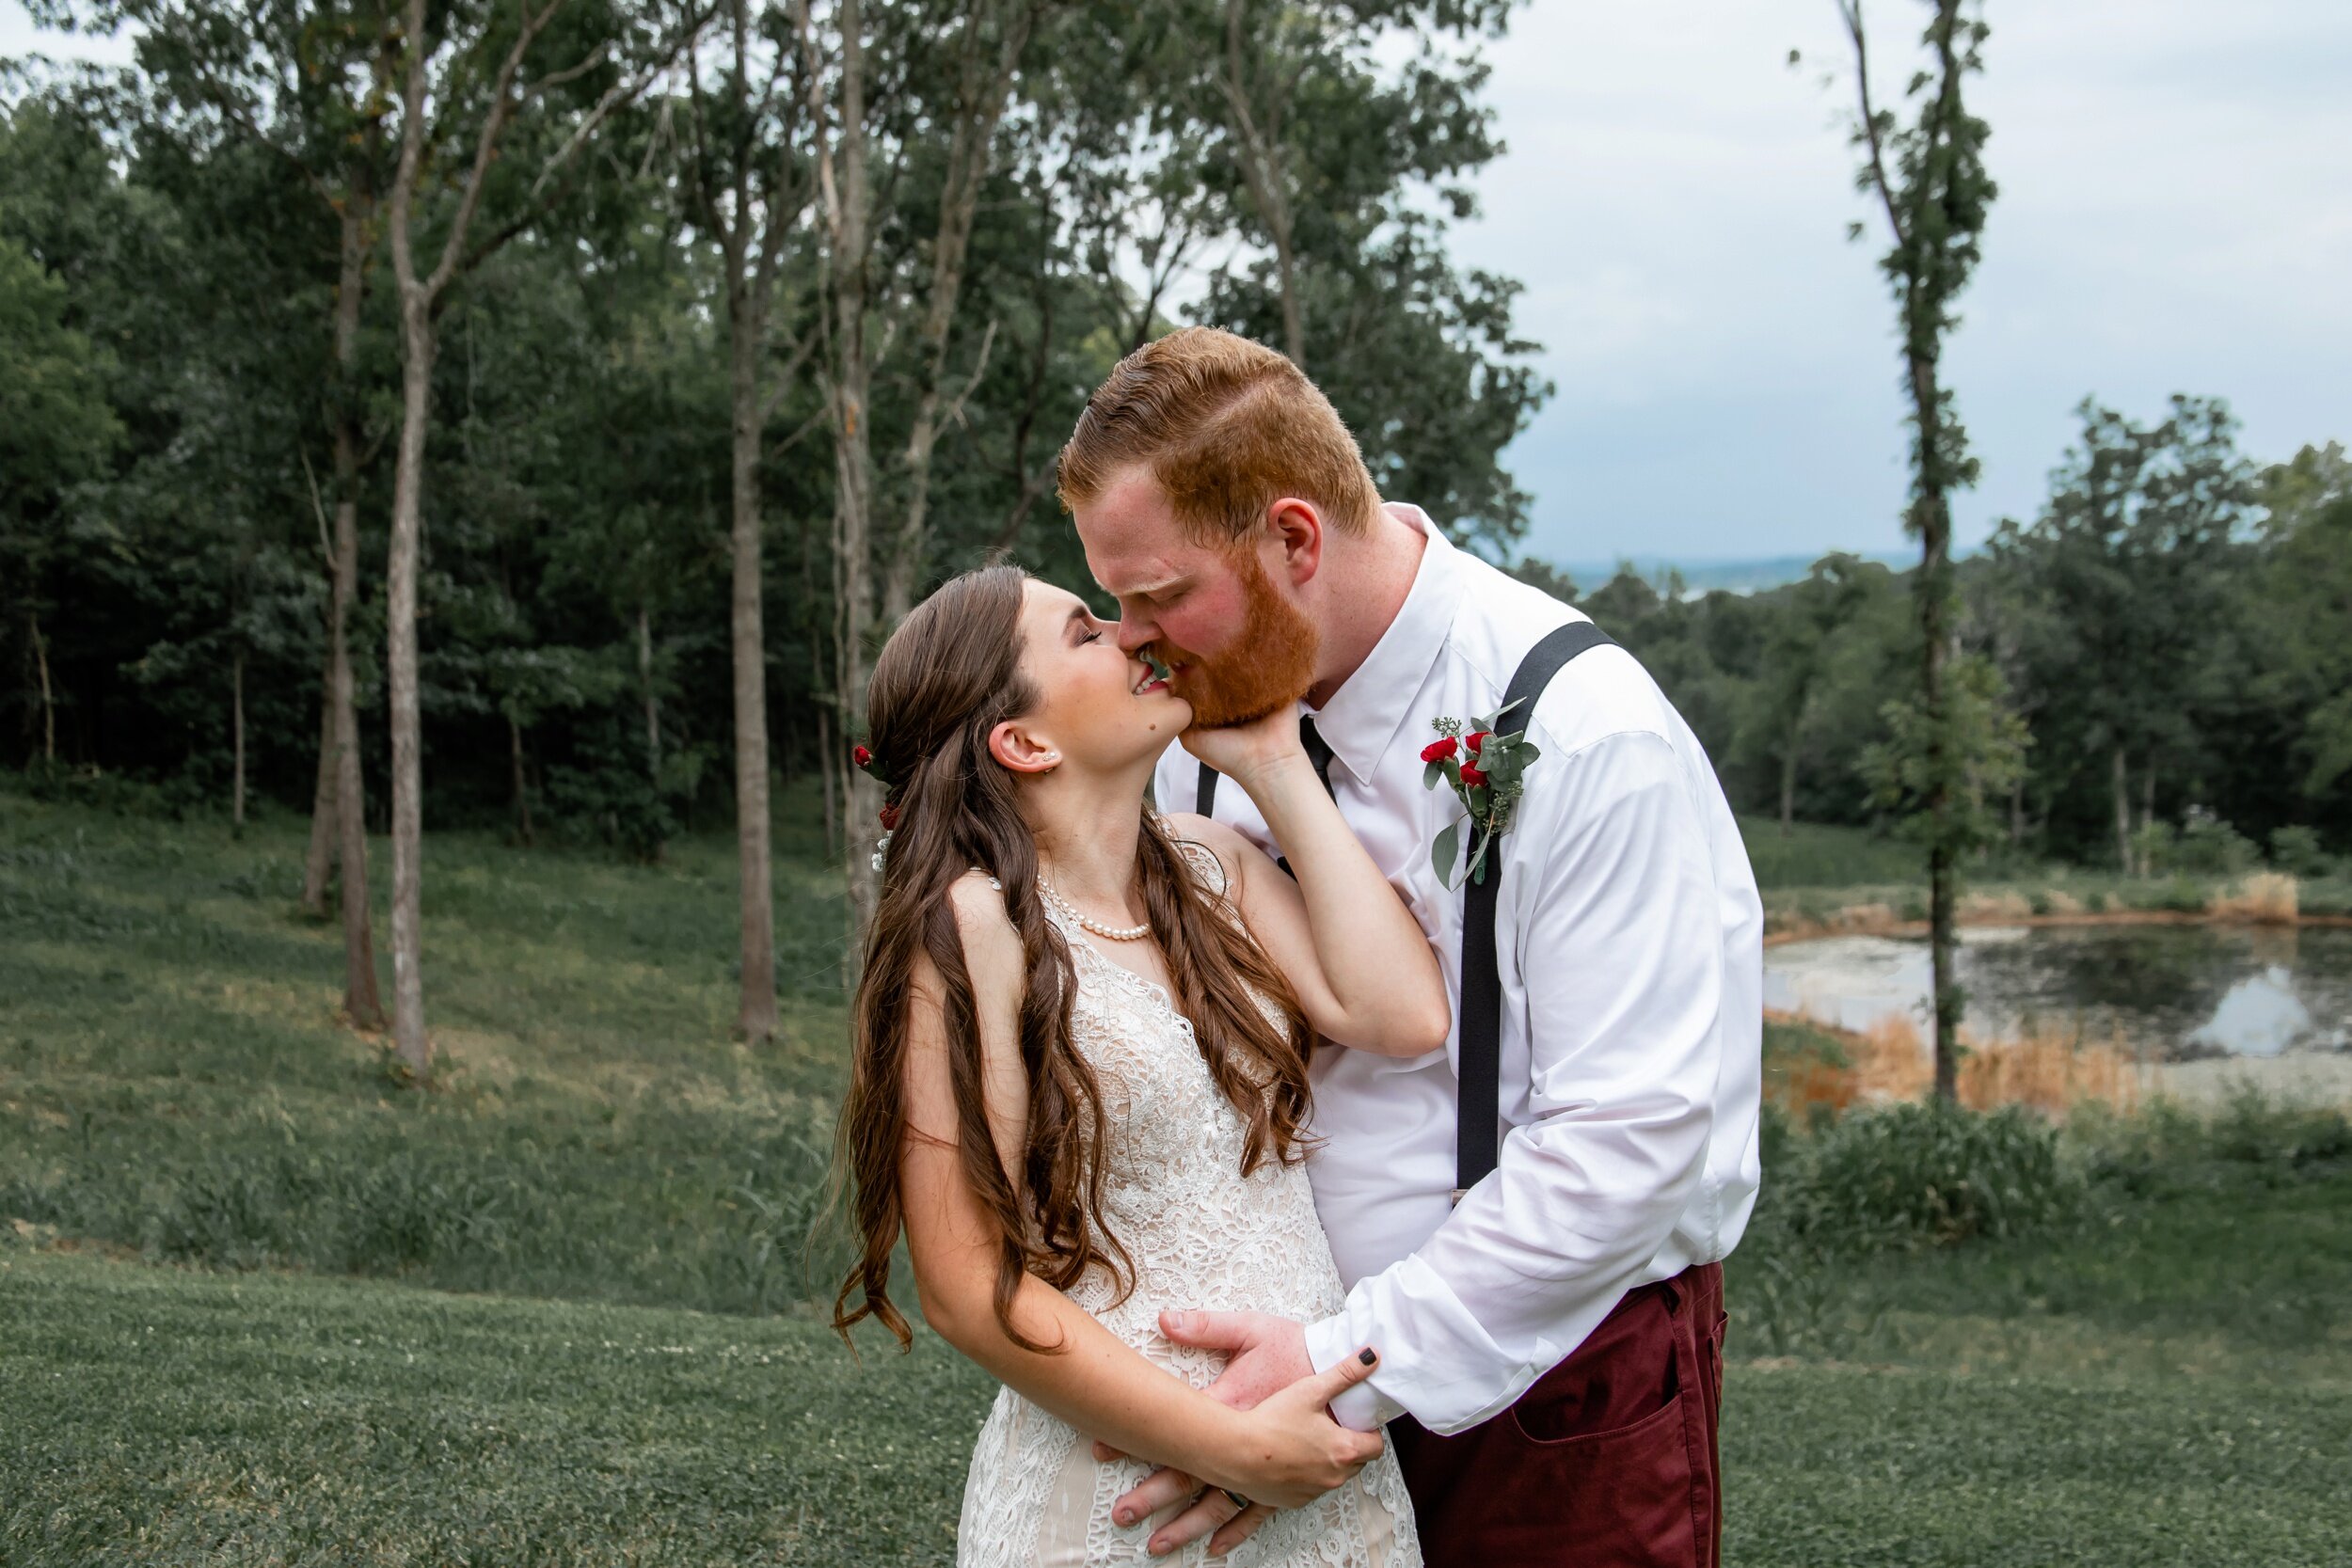 Summer Outdoor Wedding Photography at Stockton Lake by Merry Ohler - 27